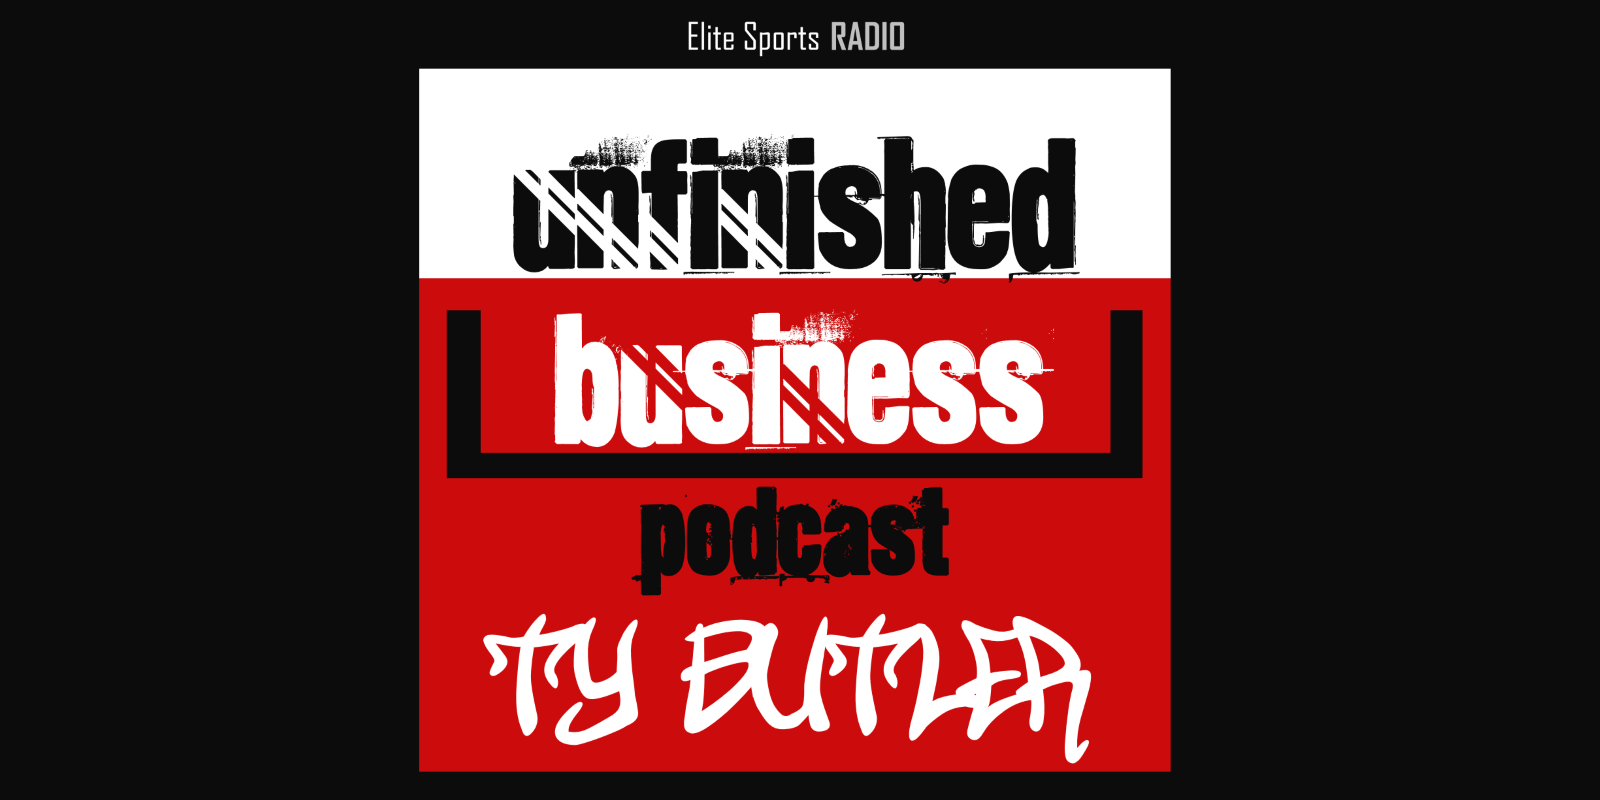 Unfinished Business Podcast